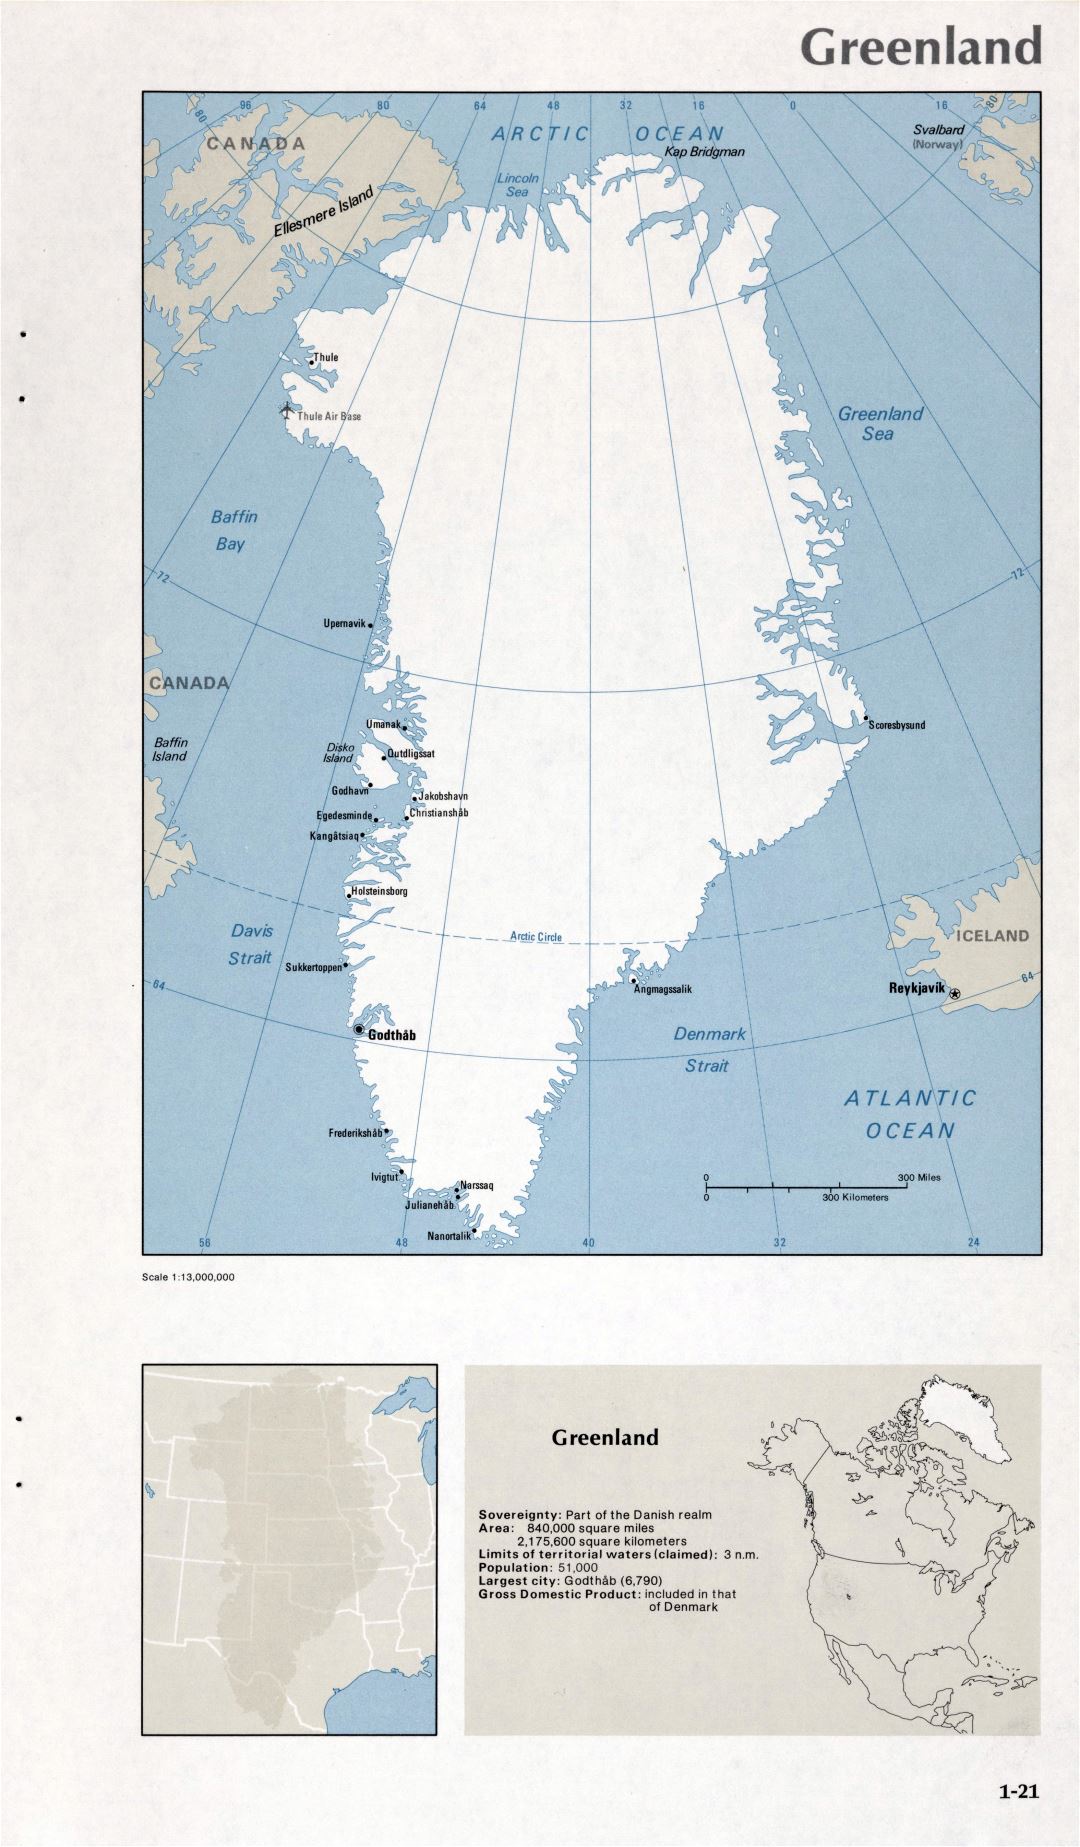 Map of Greenland (1-21)